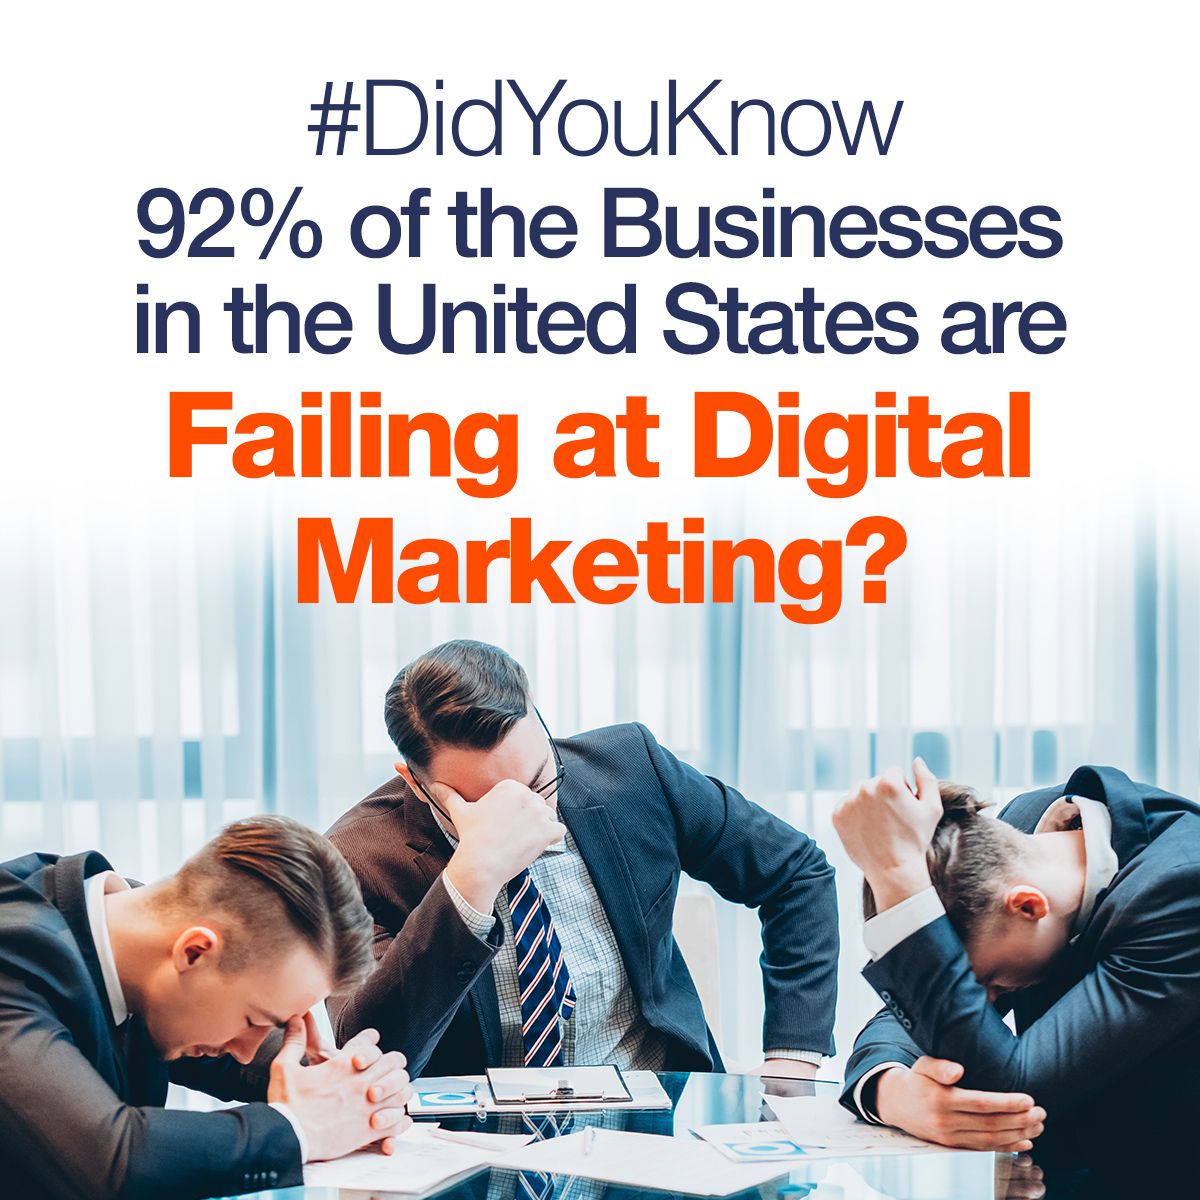 #DidYouKnow 92% of the Businesses in the United States are Failing at Digital Marketing?